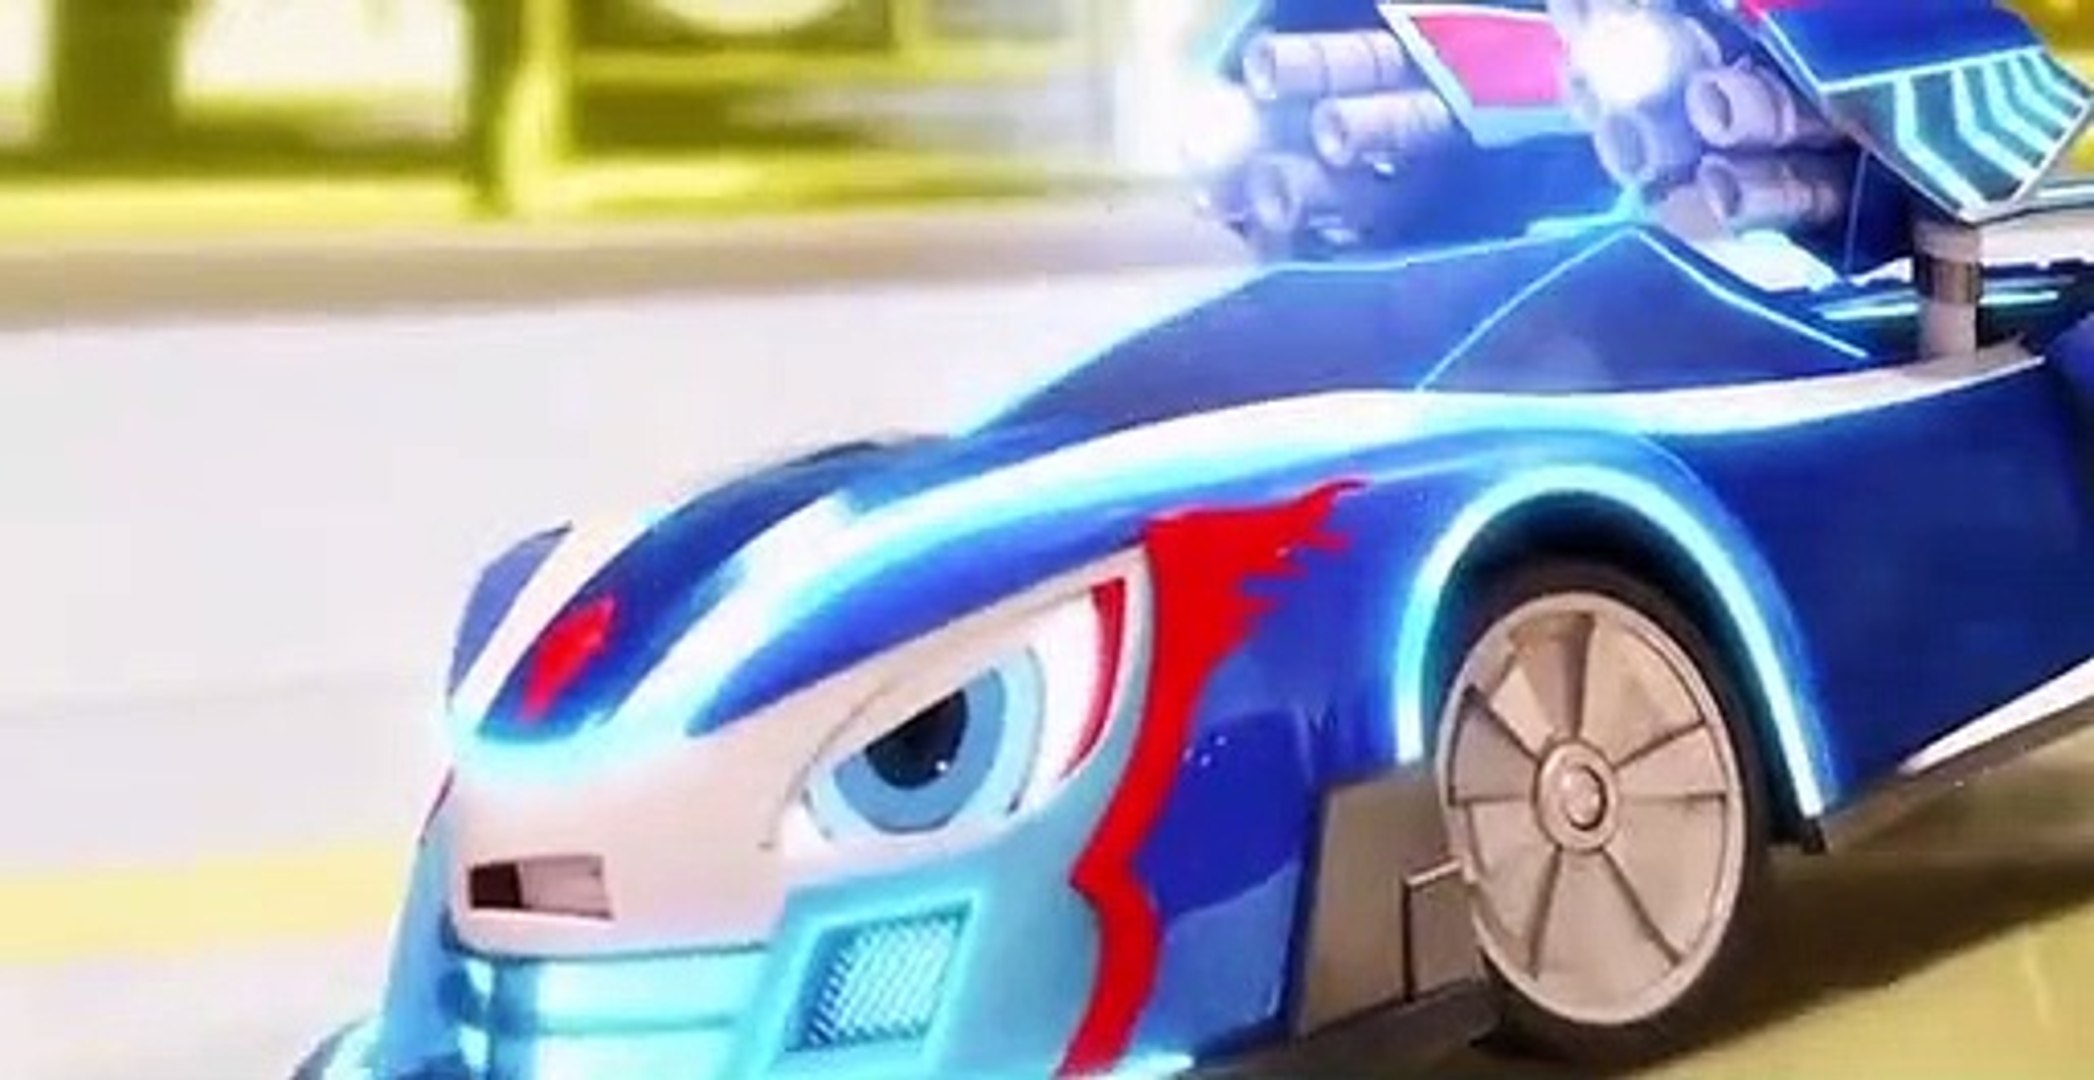 Power Battle Watch Car Power Battle Watch Car E028 The Second Guardian -  video Dailymotion